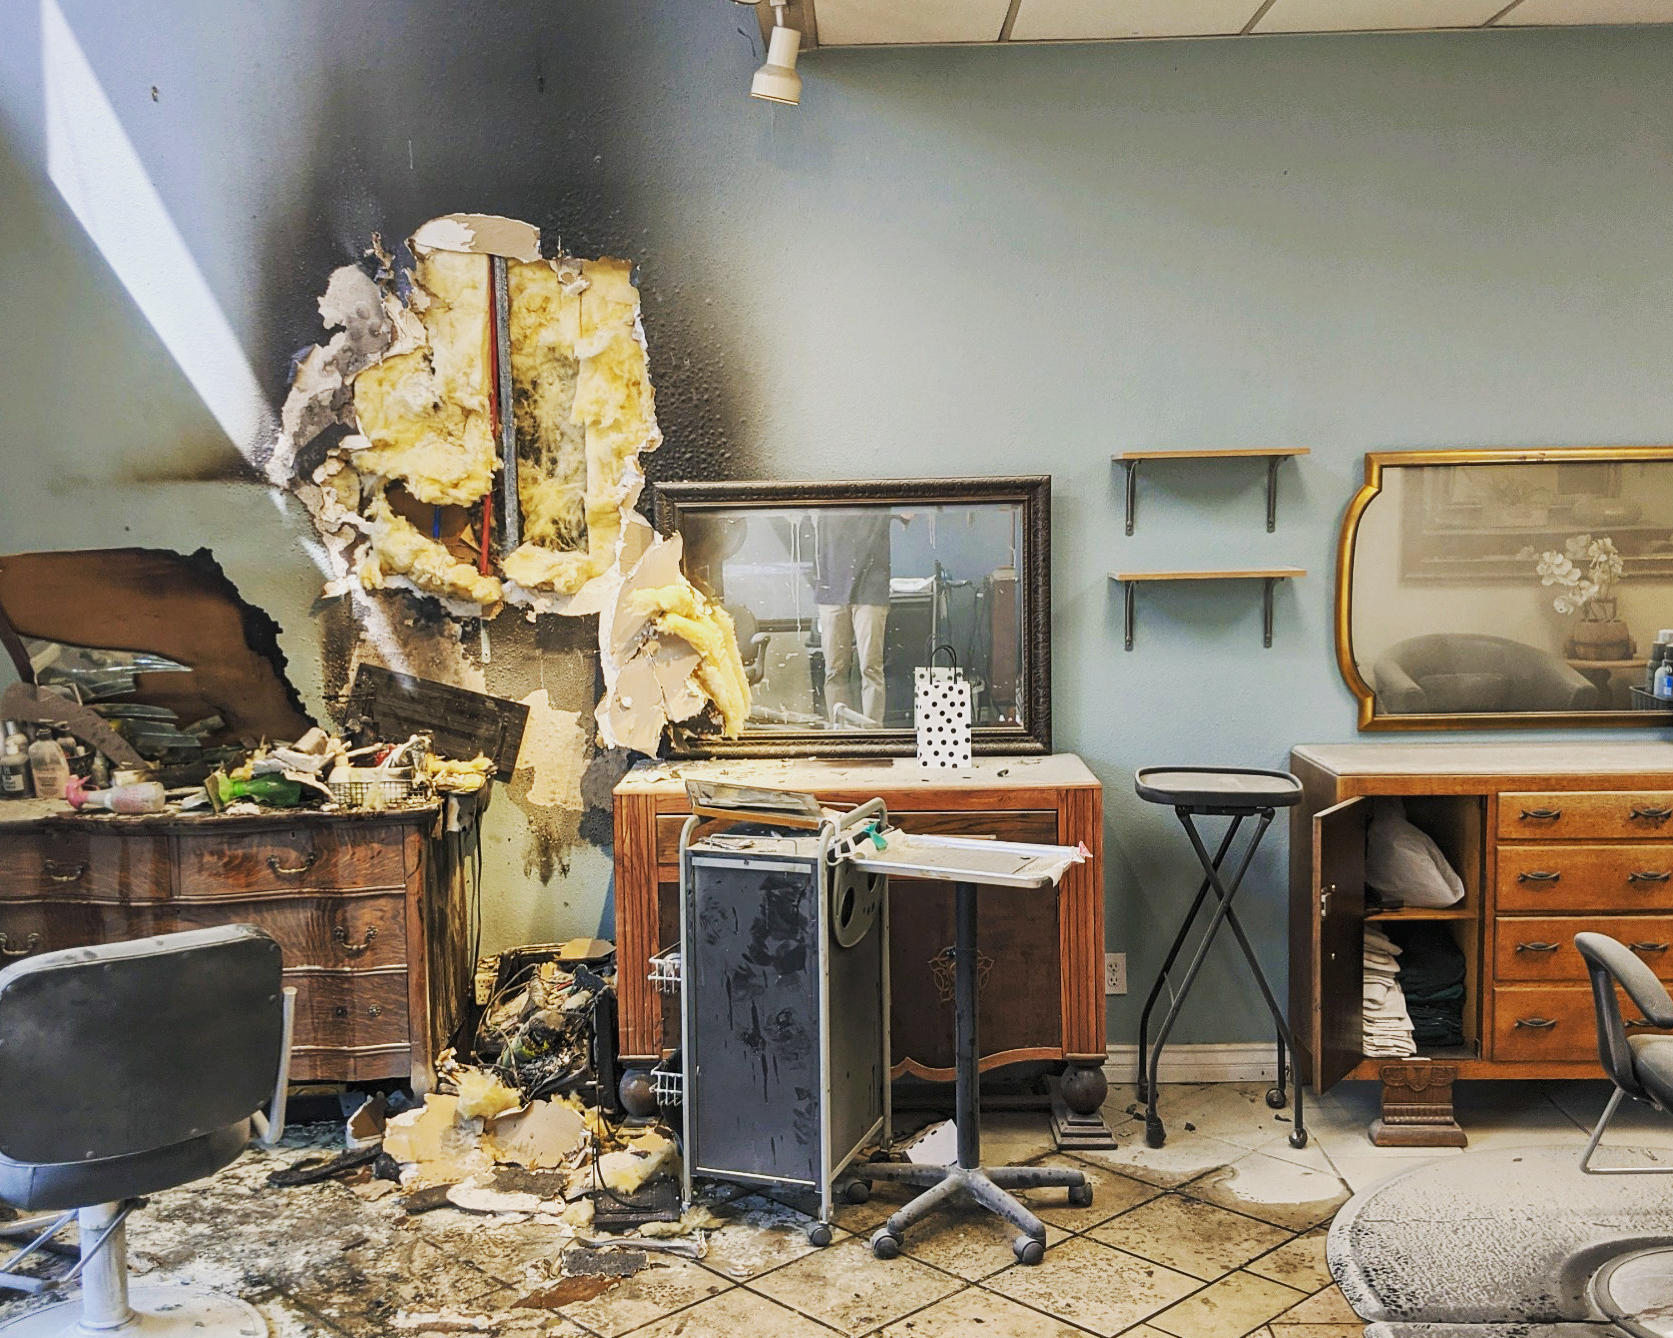 SERVPRO of Centre City / Uptown has the training, experience, and equipment to handle large commercial fire damage emergencies.